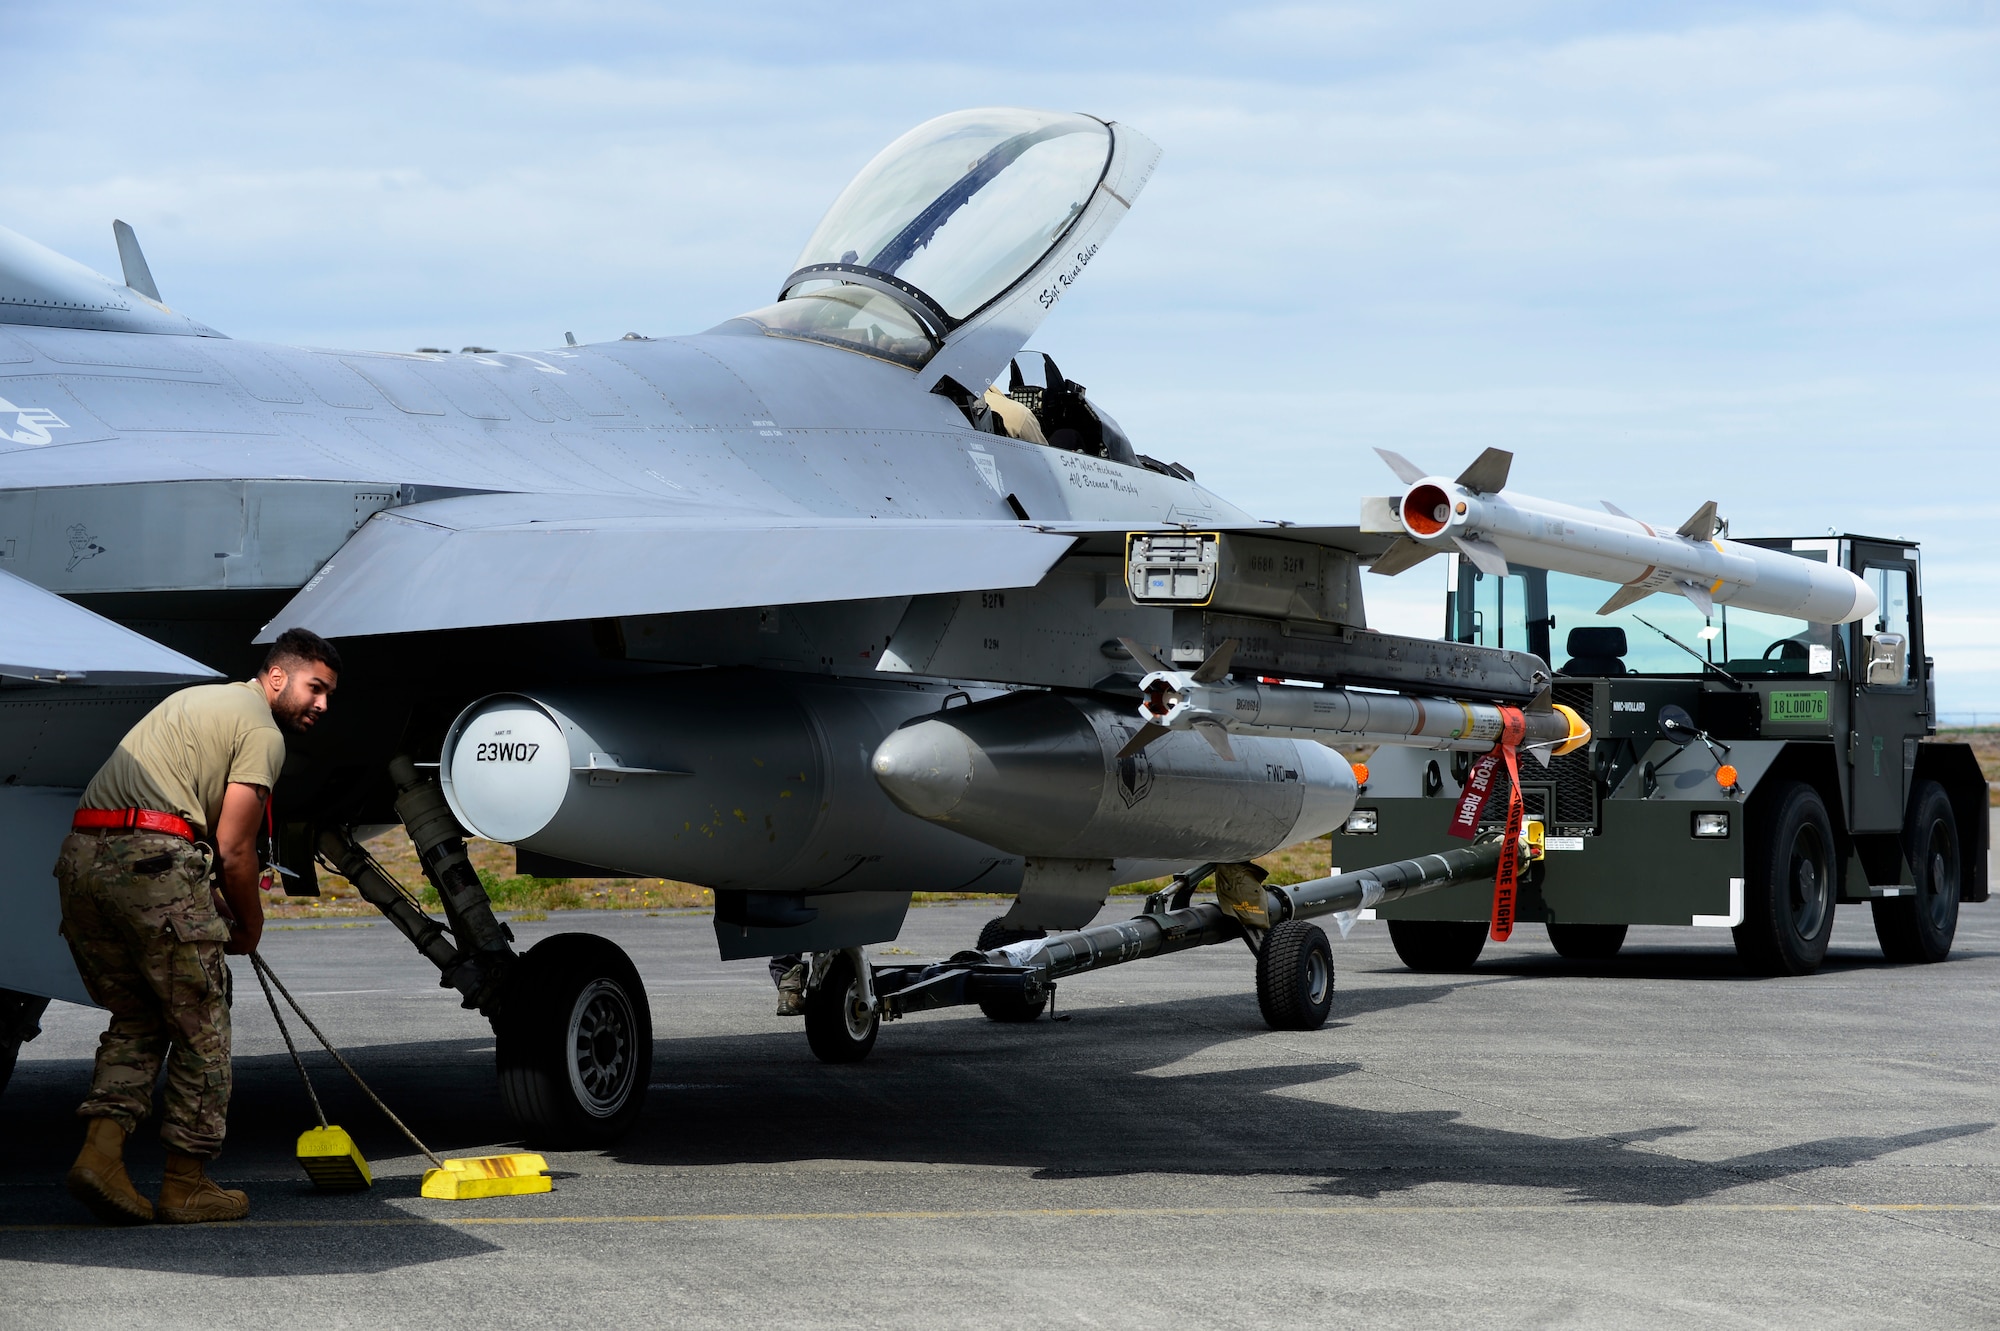 F-16 Fighting Falcons and over 100 Airmen from the 480 Fighter Squadron, 52nd Fighter Wing, are in Iceland in support of NATO alliance commitments. The U.S. has been participating in this Iceland Air Surveillance mission since 2008.